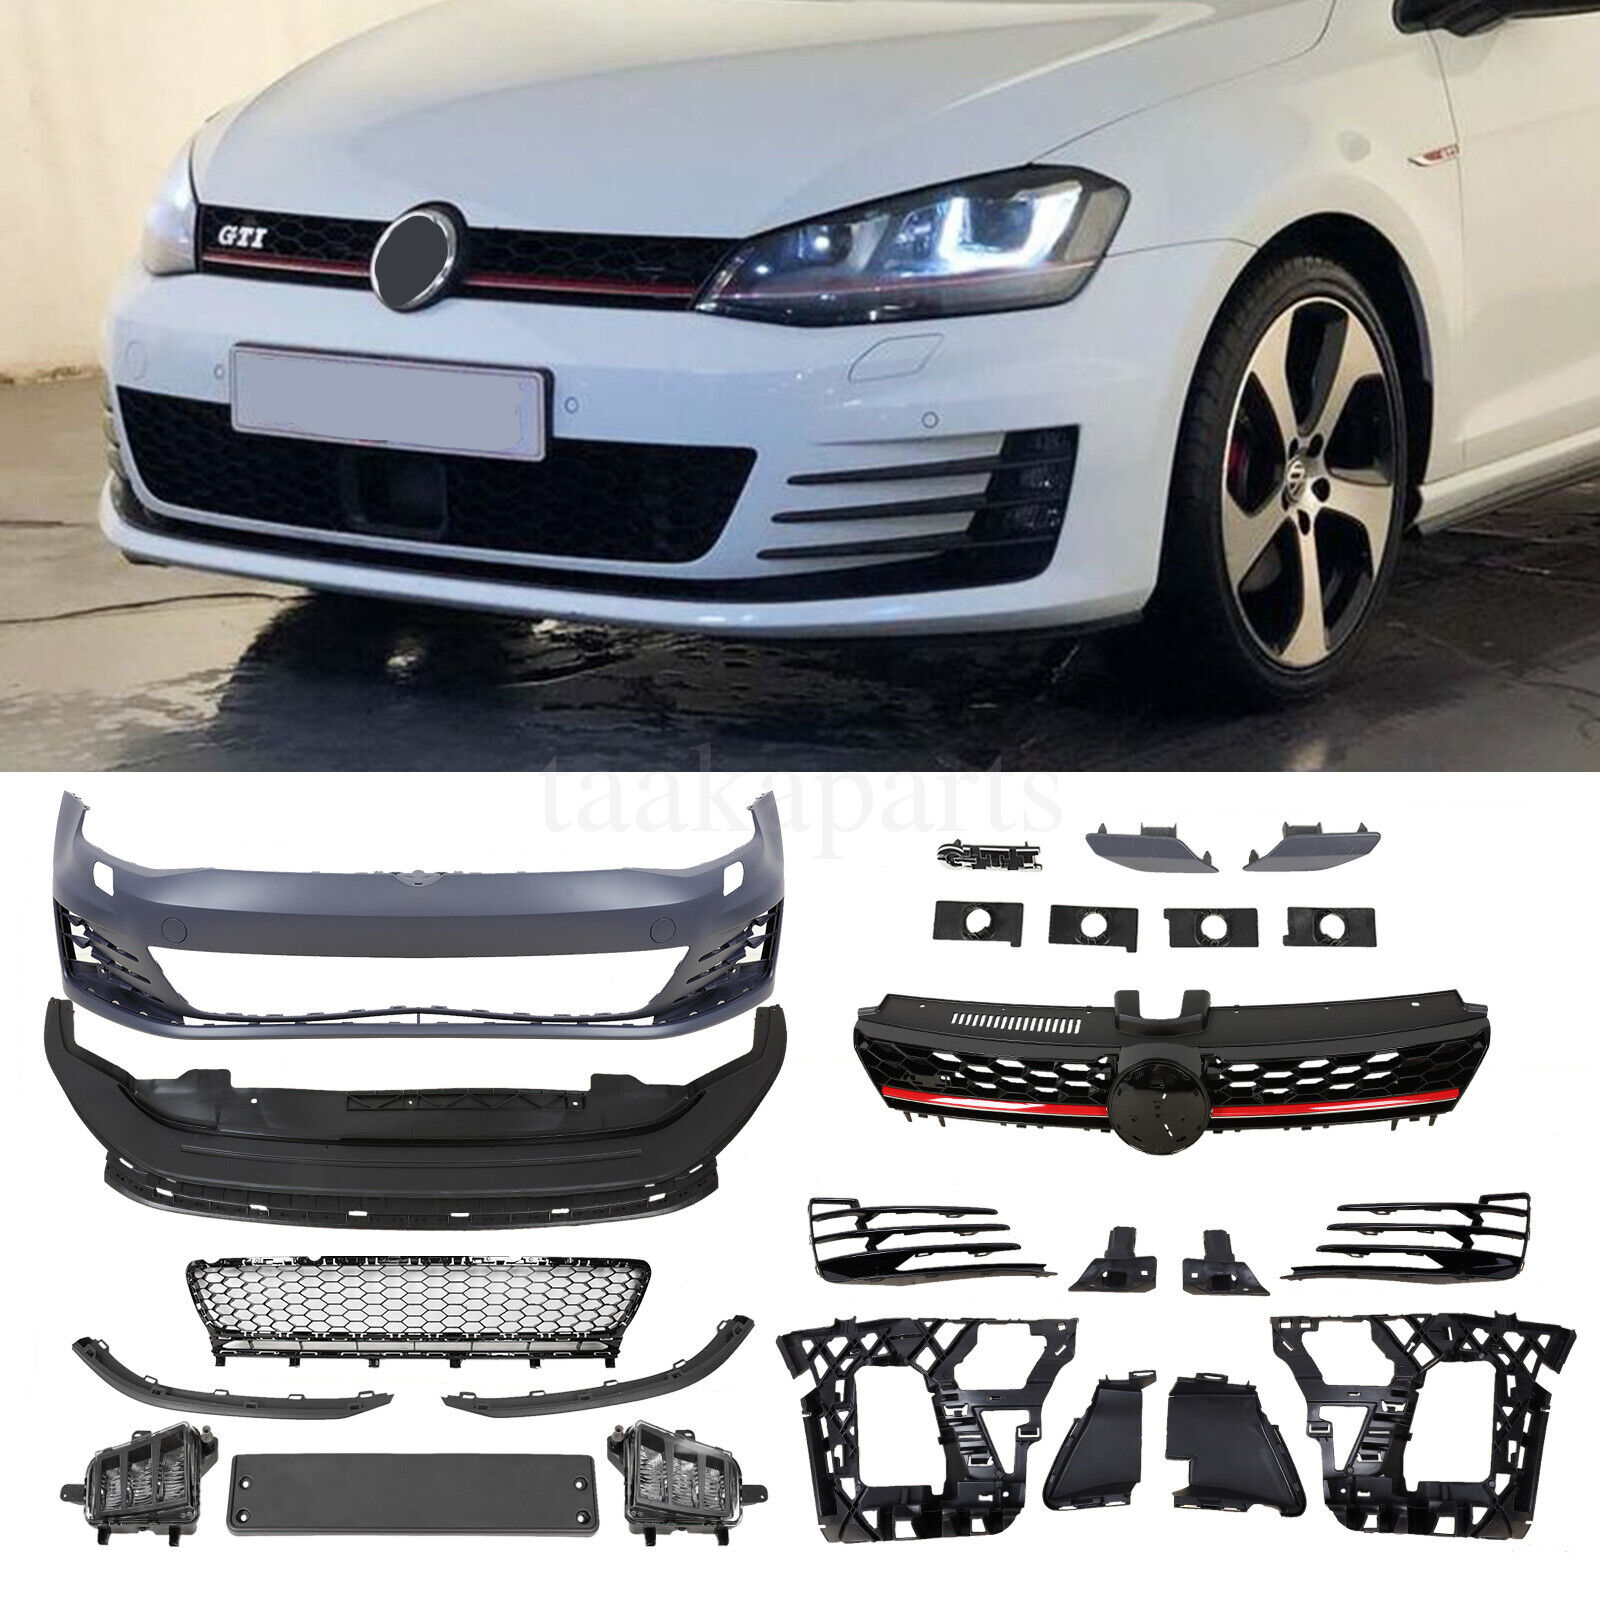 Unpainted Gti Style Front Bumper Kit W/O PDC Holes for Volkswagen VW Golf MK7